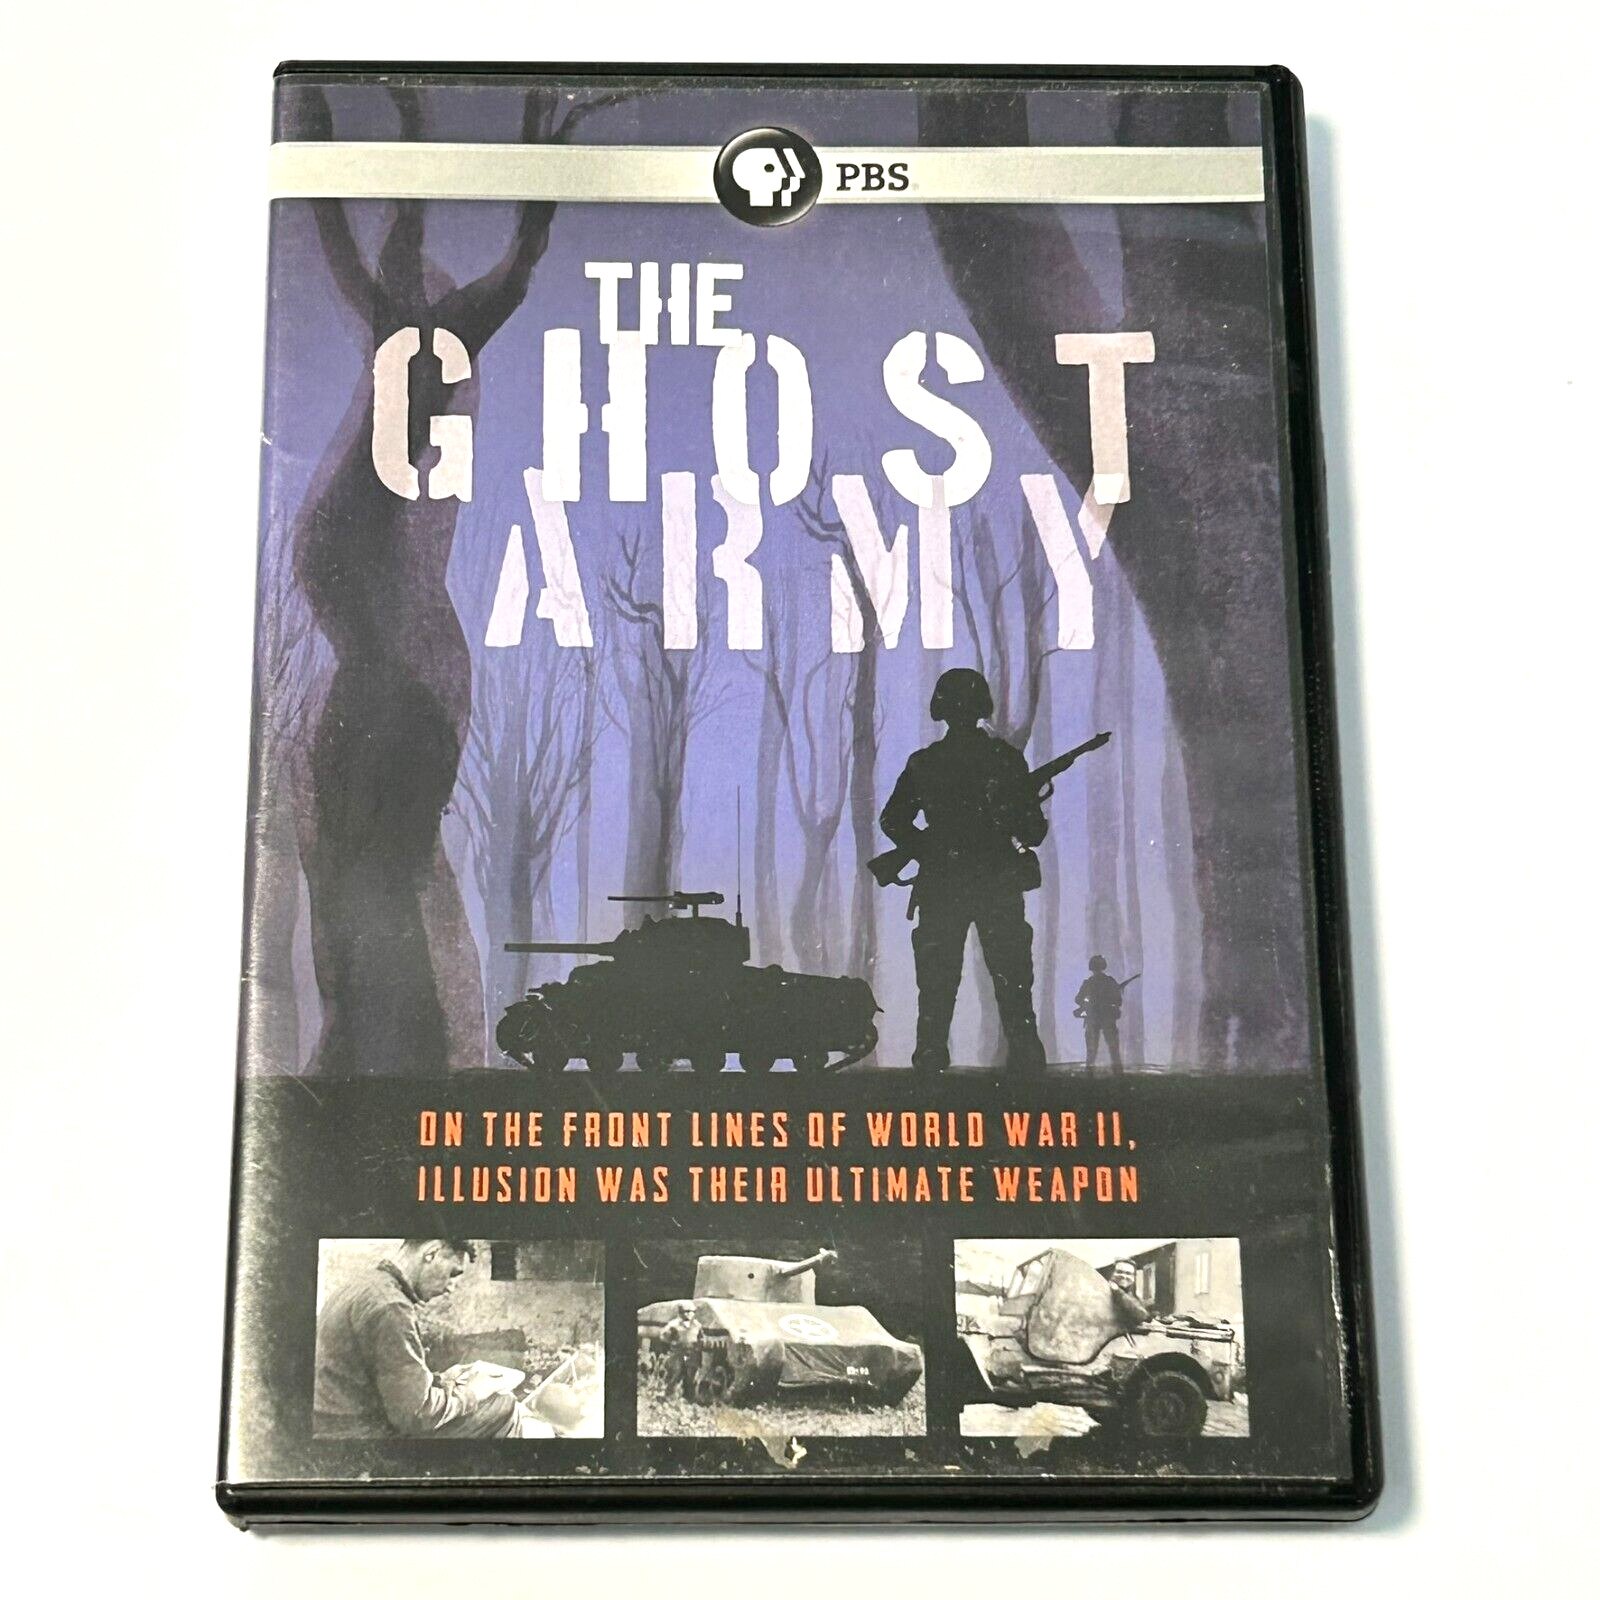 The Ghost Army (DVD, 2013, PBS) WWII documentary